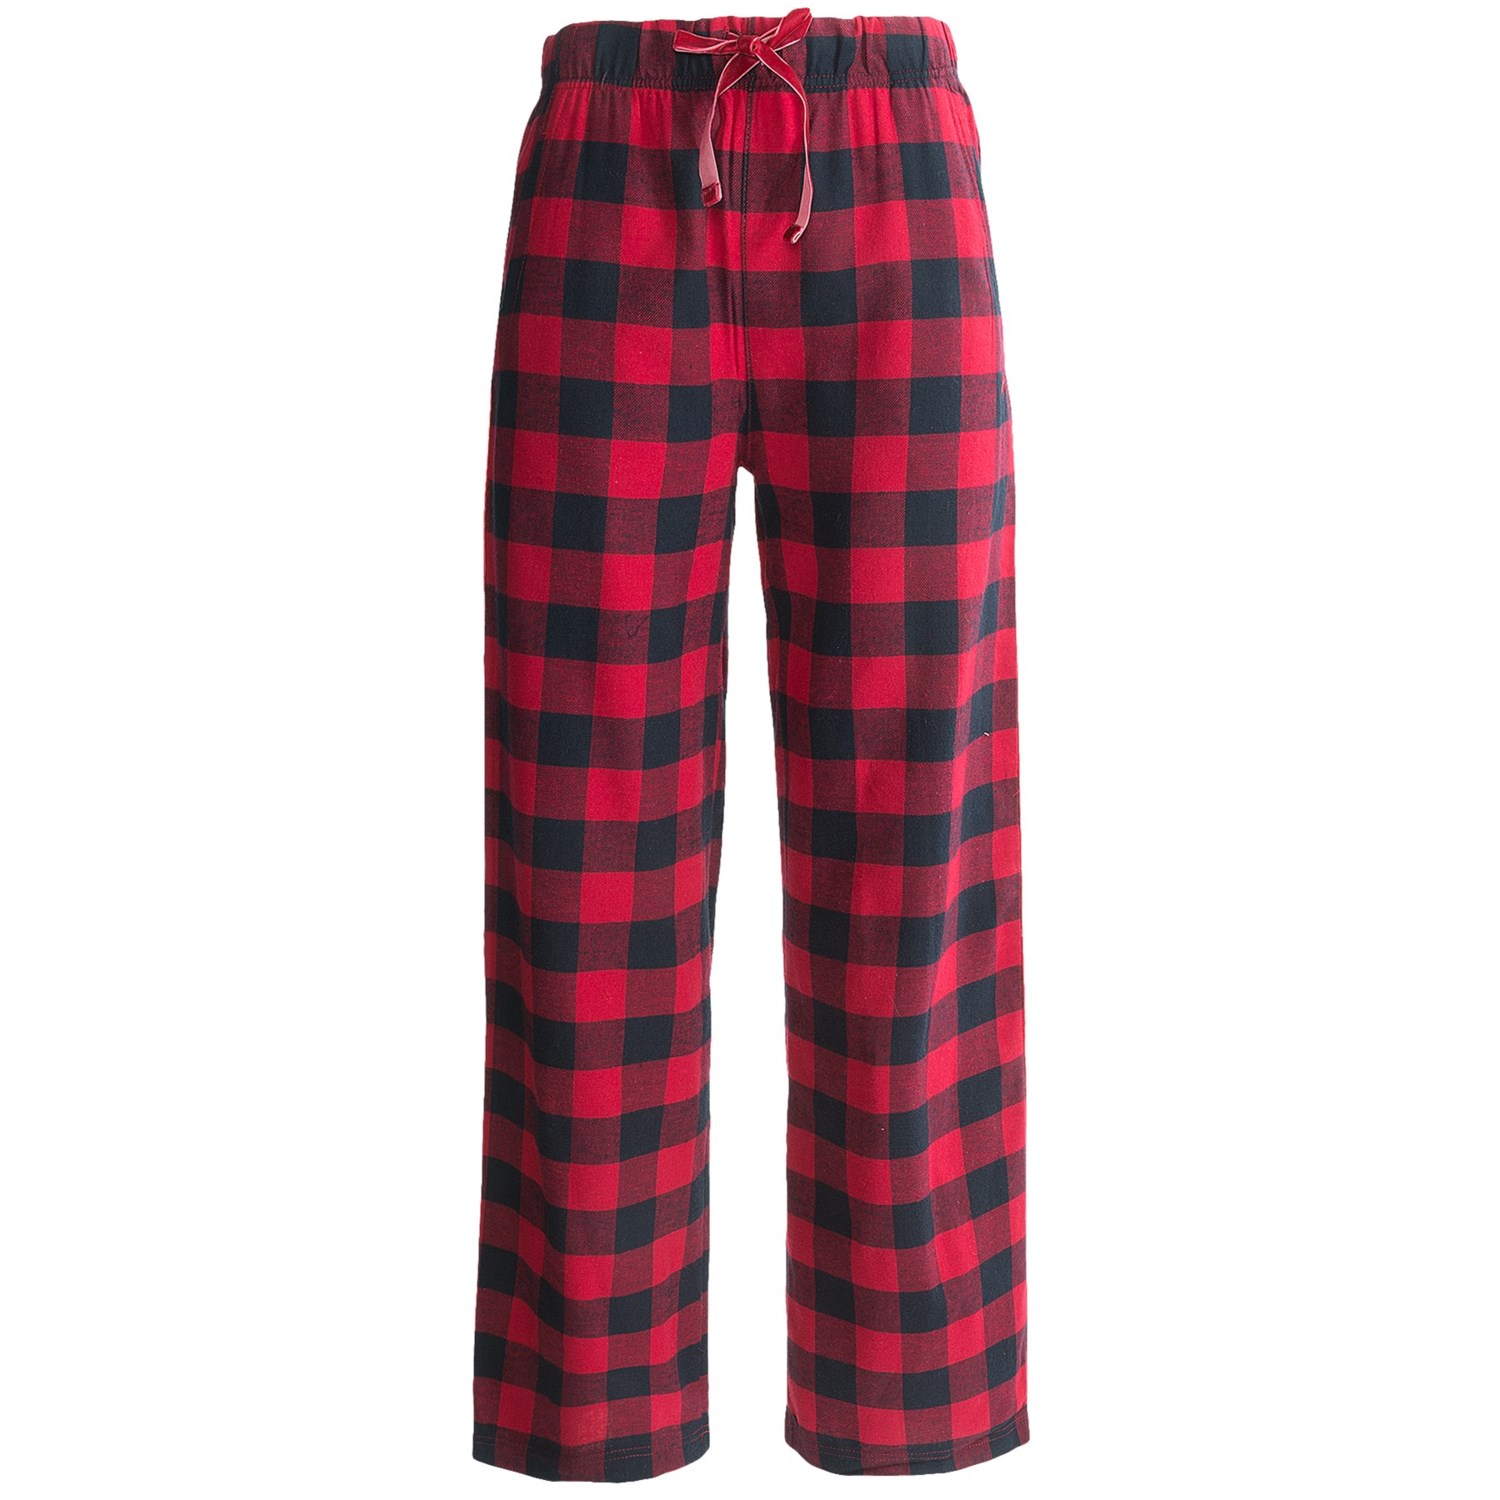 Woolrich Buffalo Check Flannel Pajama Bottoms (For Women) 6861J